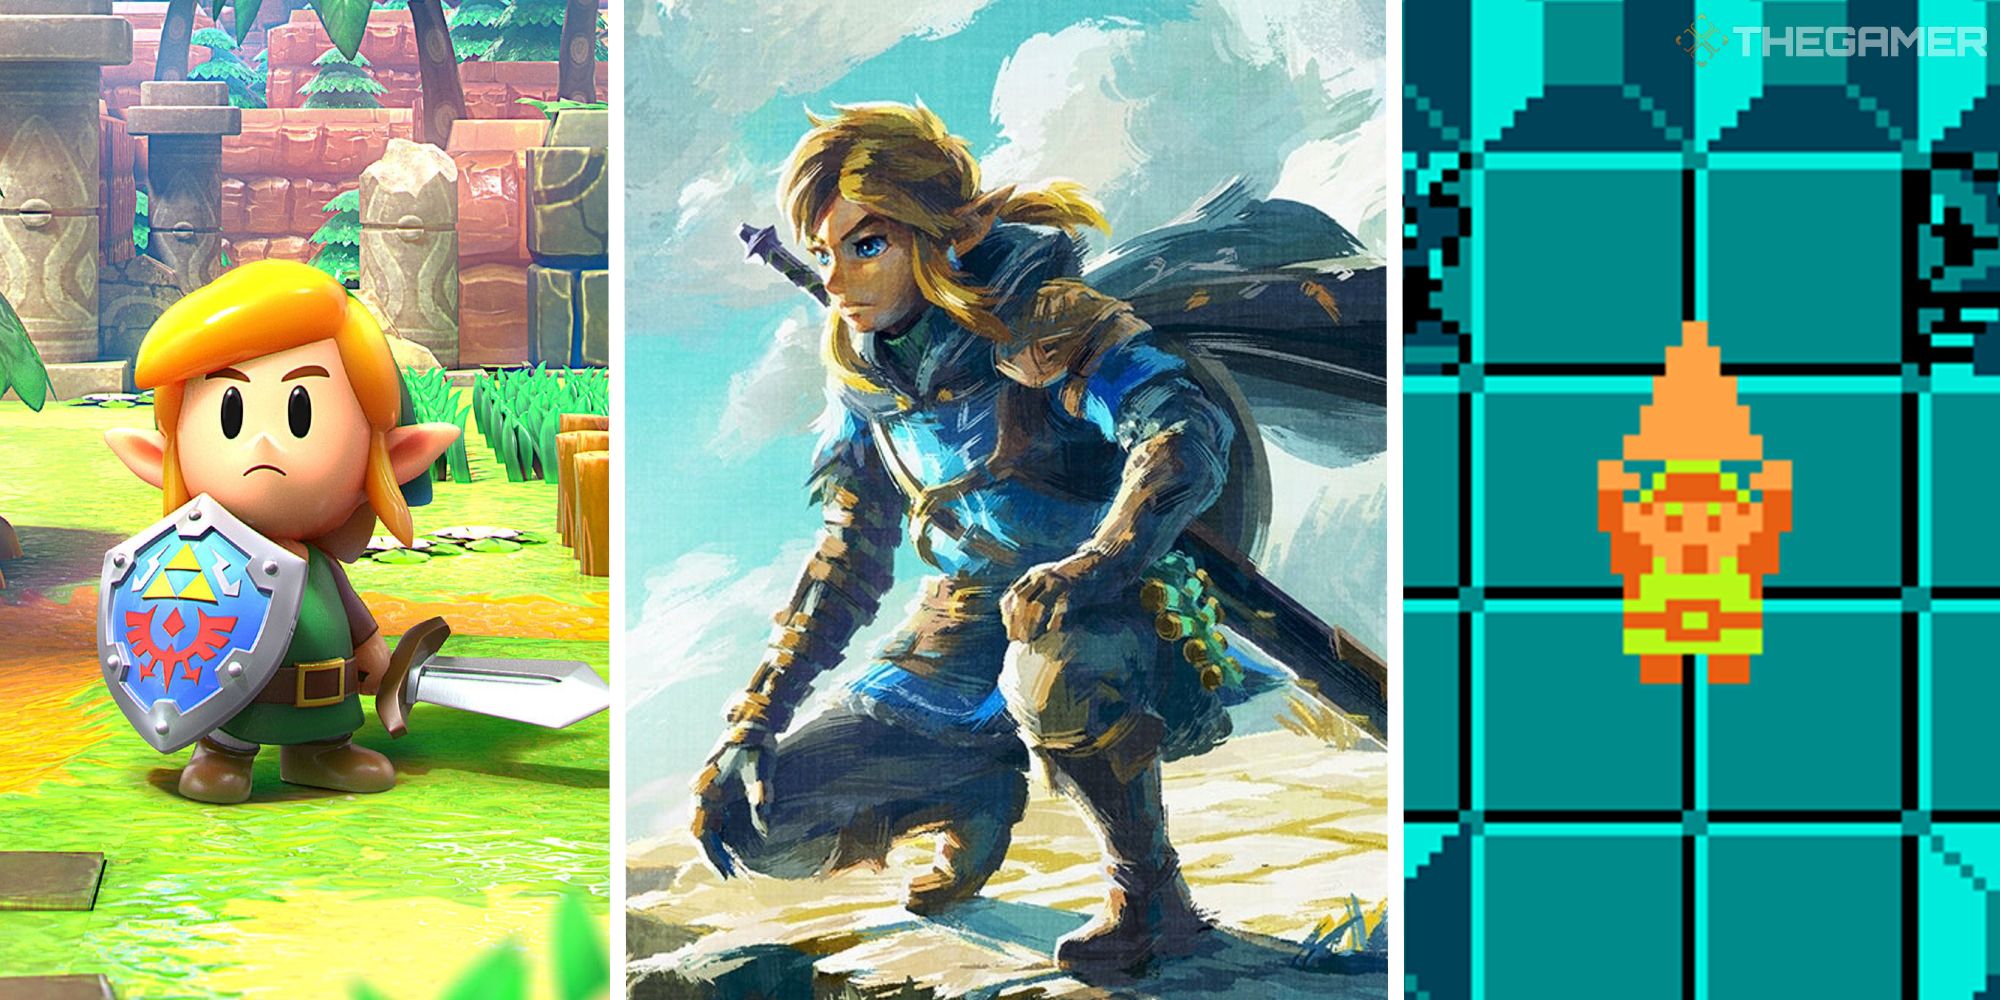 How Link Has Changed Since the First Legend of Zelda Game